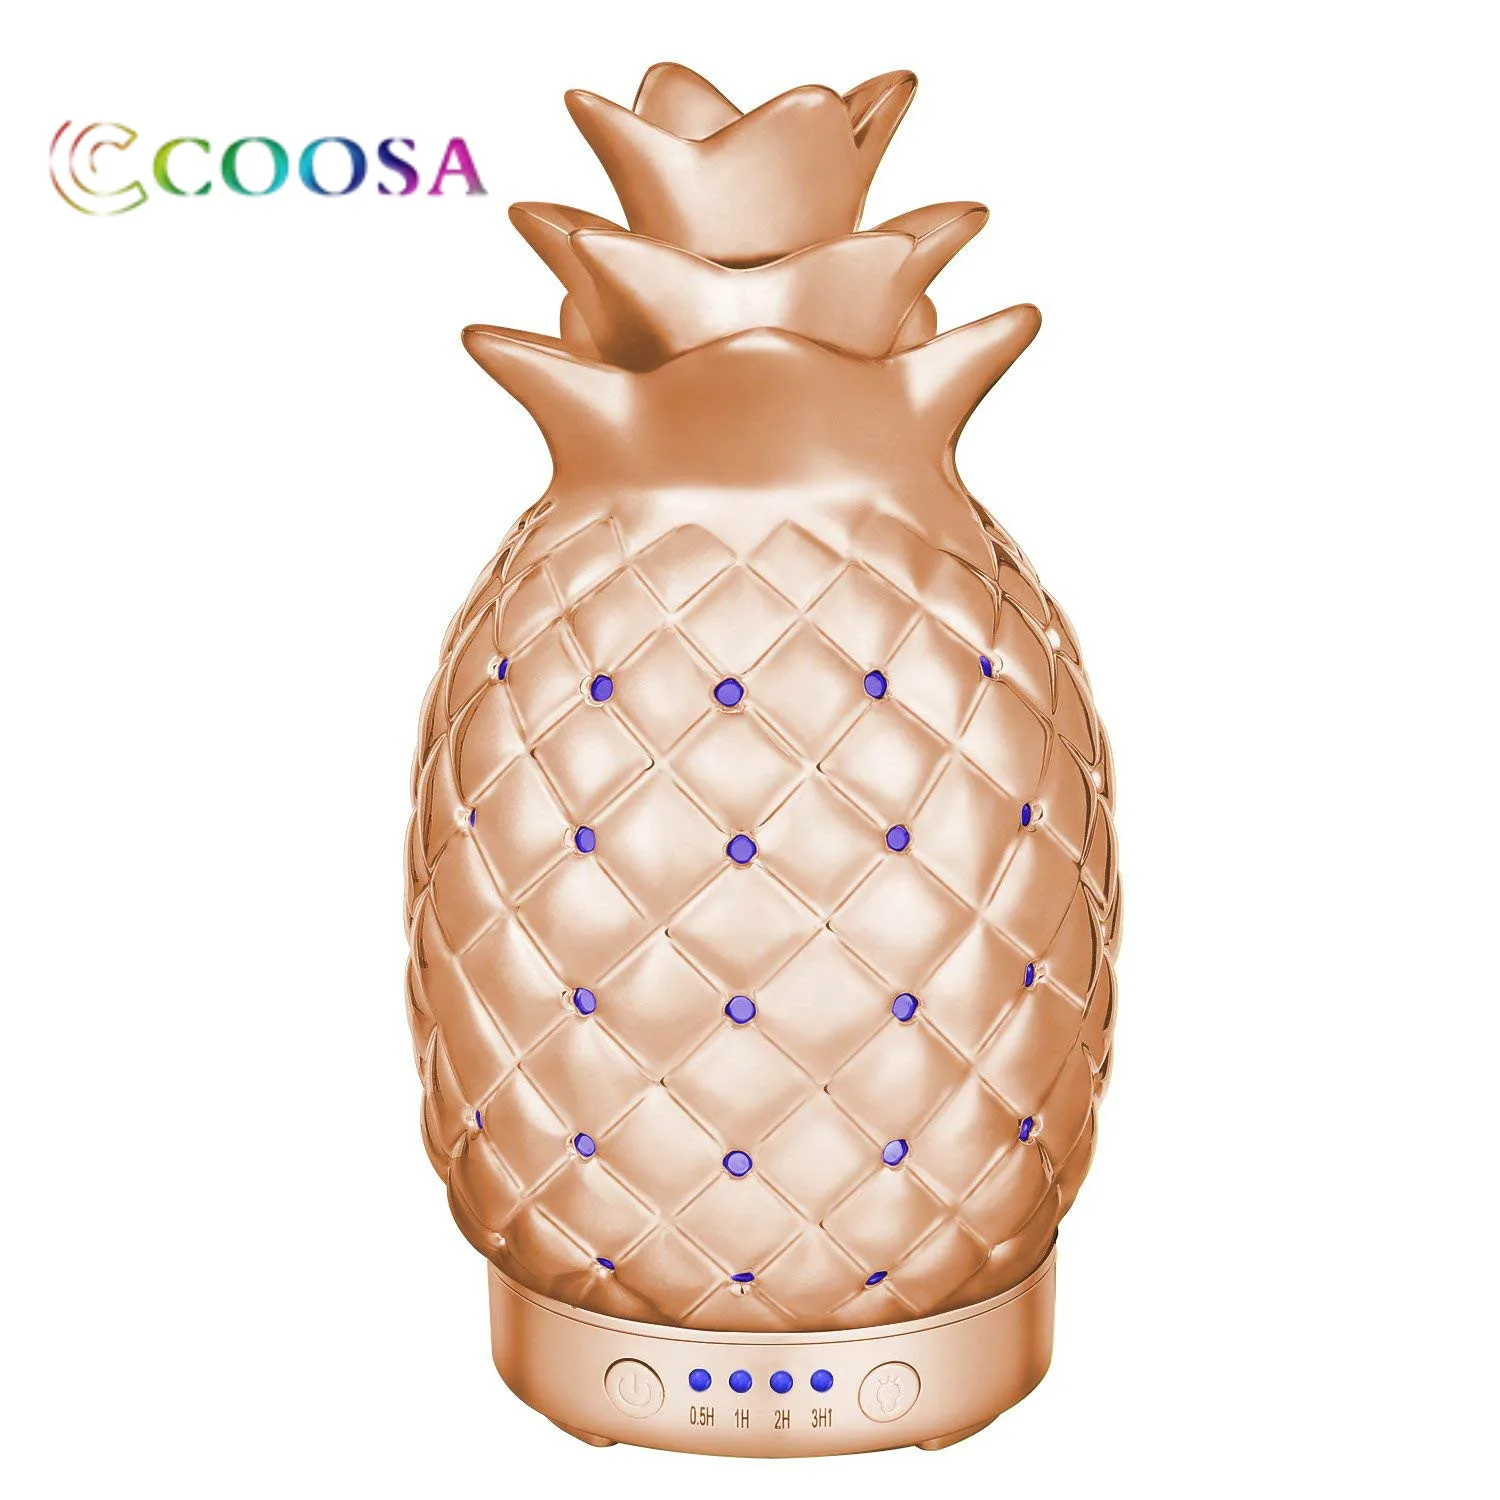 TOP Modern Pineapple Design humidifier,Automatic Shut-Off Ultra-Quiet Operation Baby Nursery,Bedrooms Office 